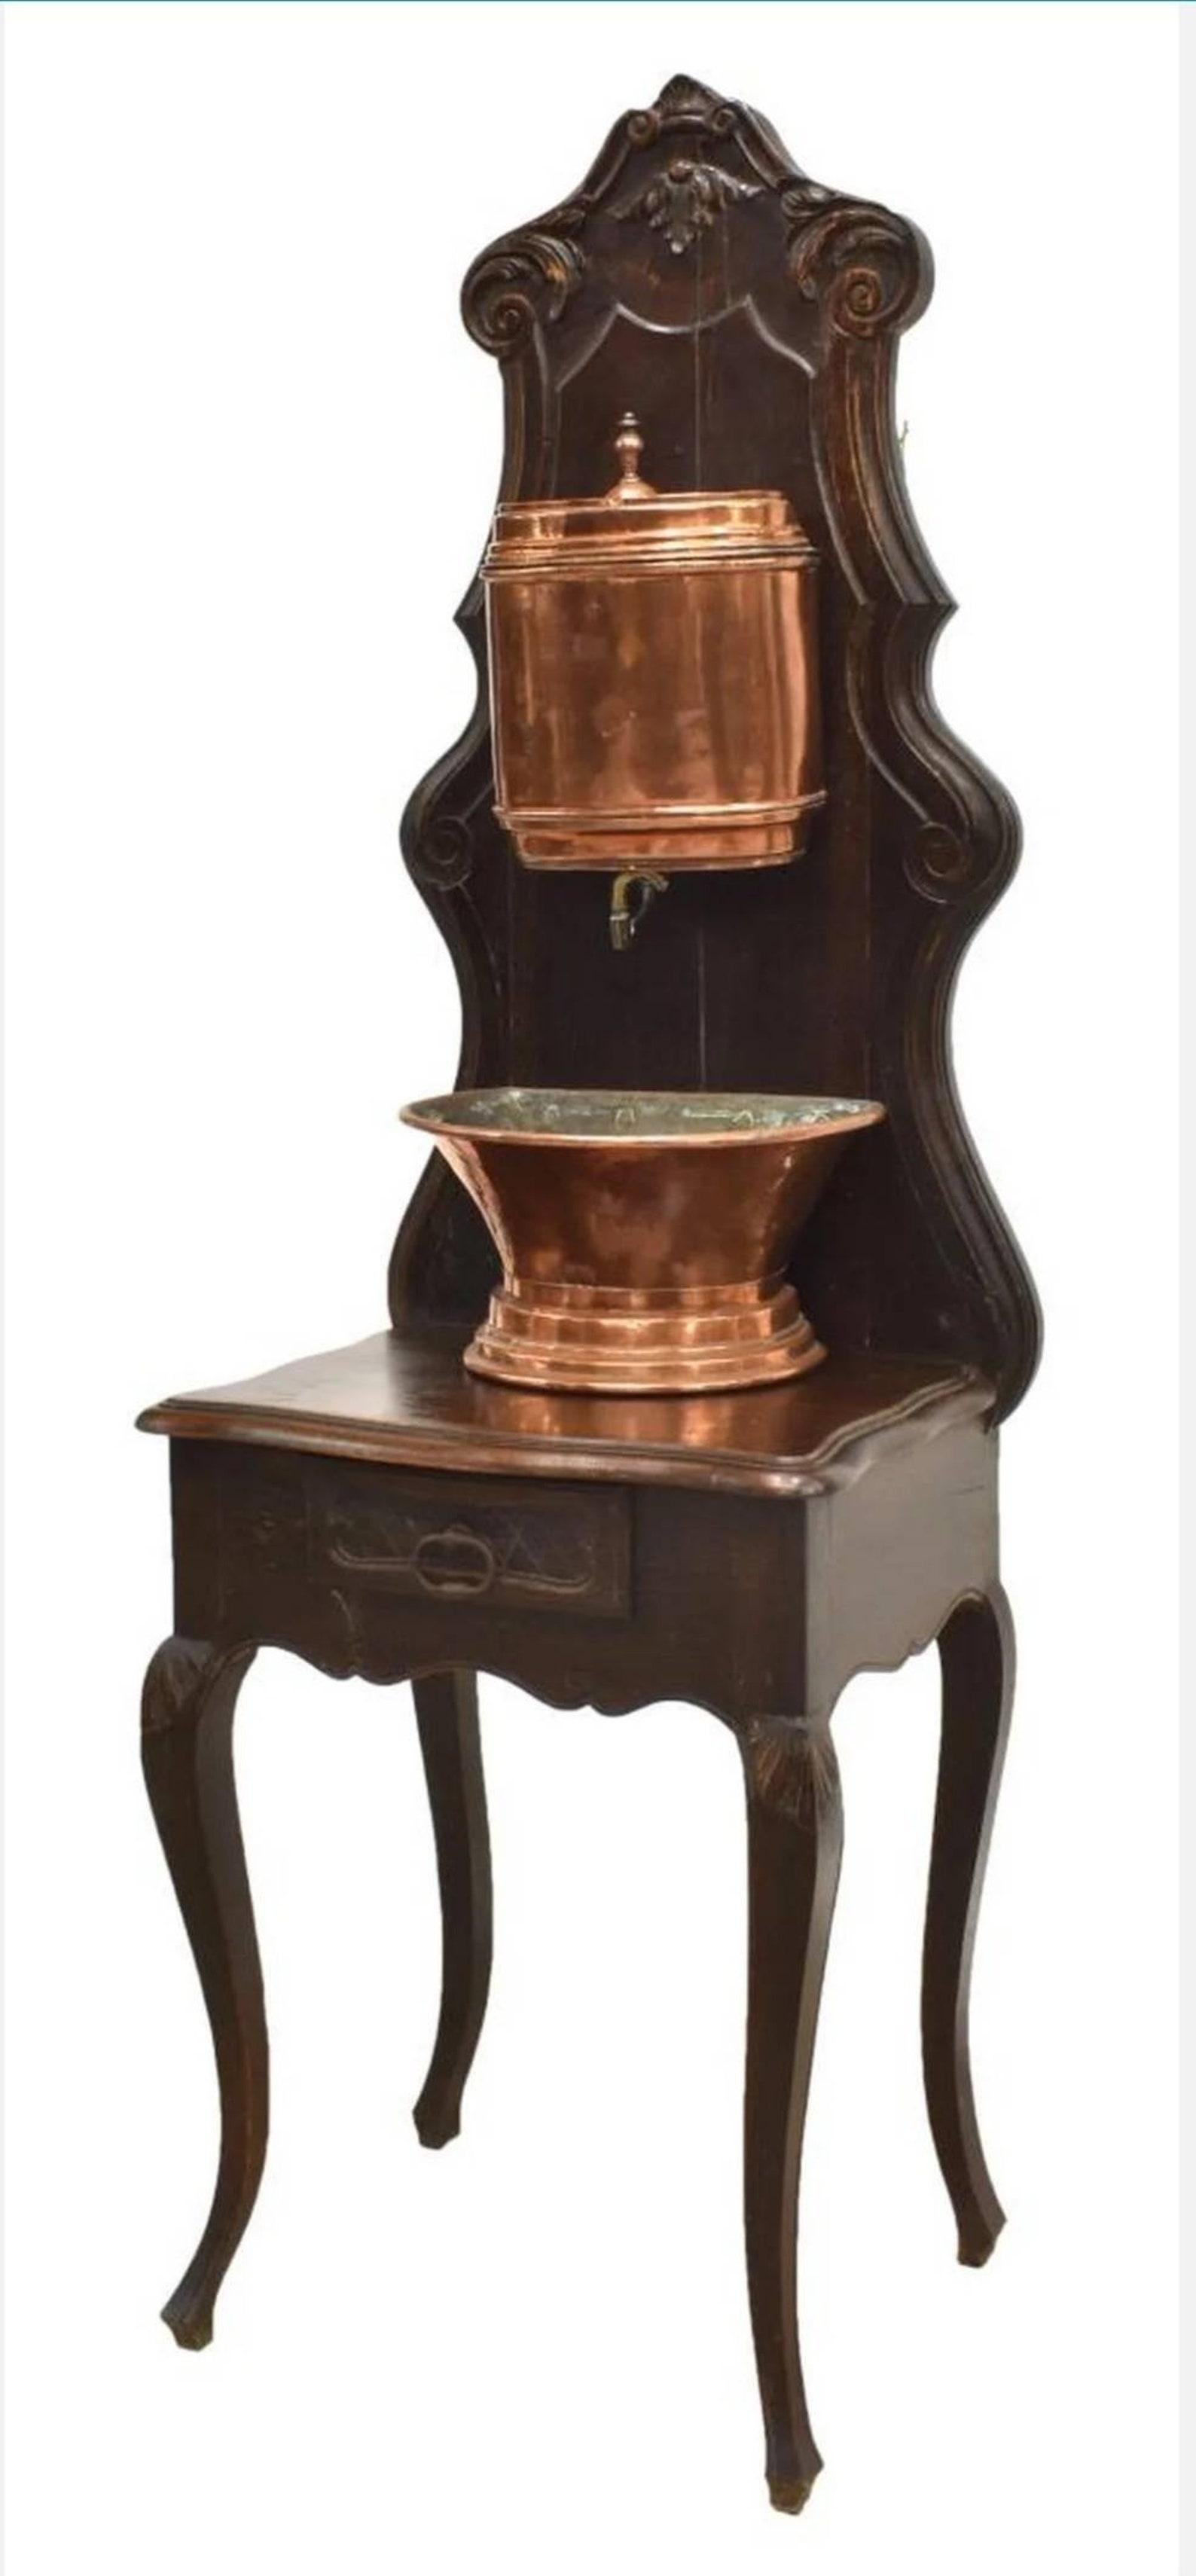 A wonderful and rare, almost 200 year old antique French Provincial Lavabo (water fountain) with beautifully aged patina. Handcrafted in Louis XV taste, dating to around the second quarter of the 19th century, having a hand carved oak stand with